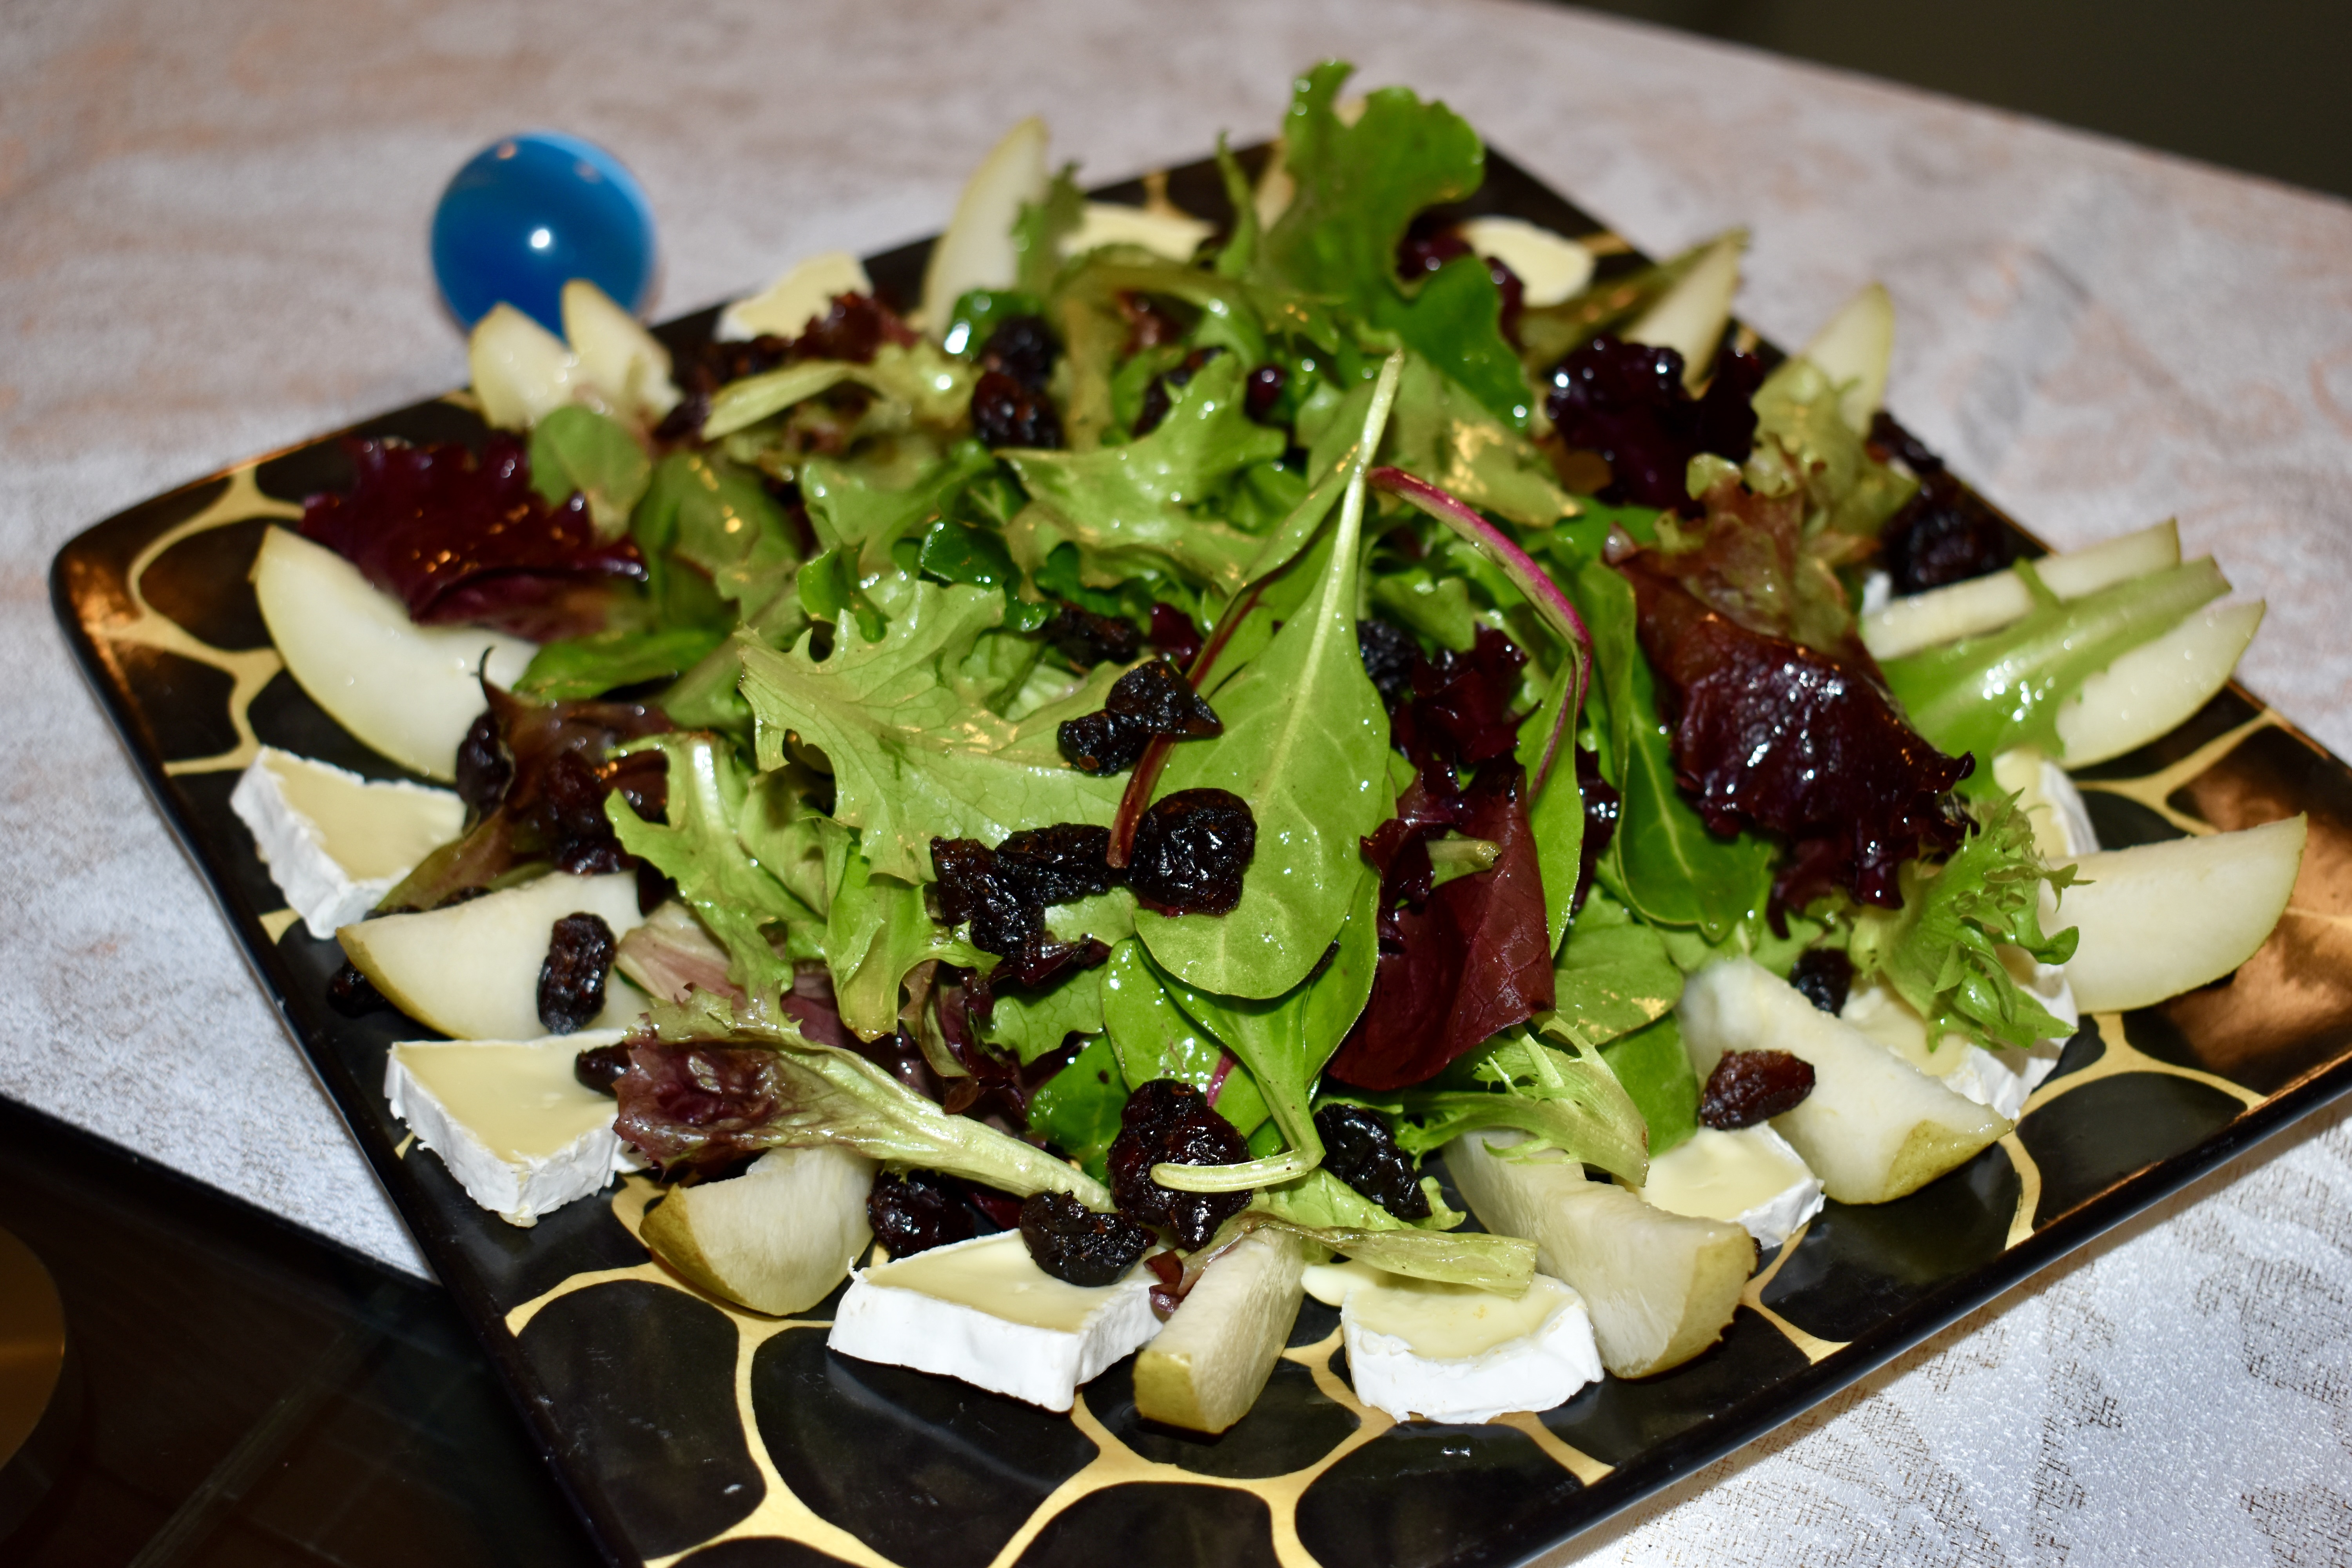 Brie and Pear Salad with Champagne Vinaigrette